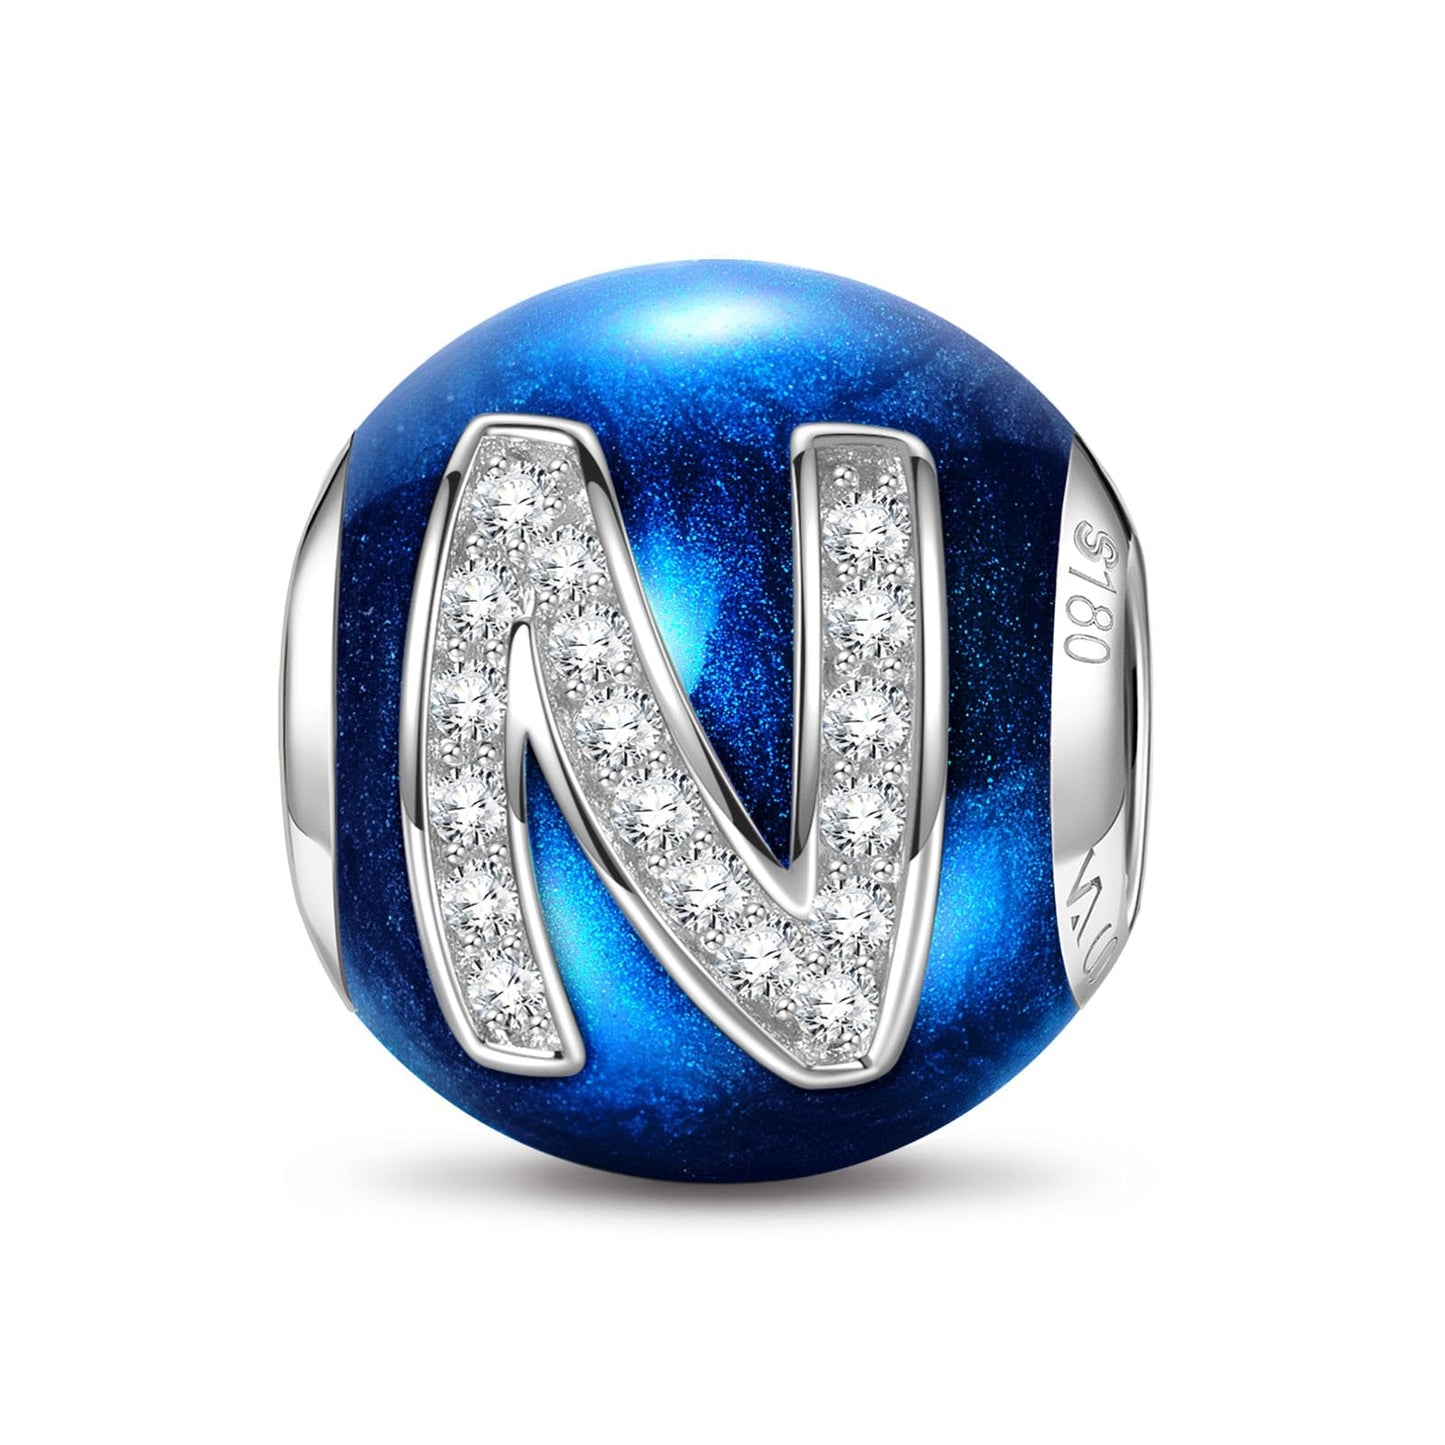 Letter N Tarnish-resistant Silver Charms With Enamel In White Gold Plated